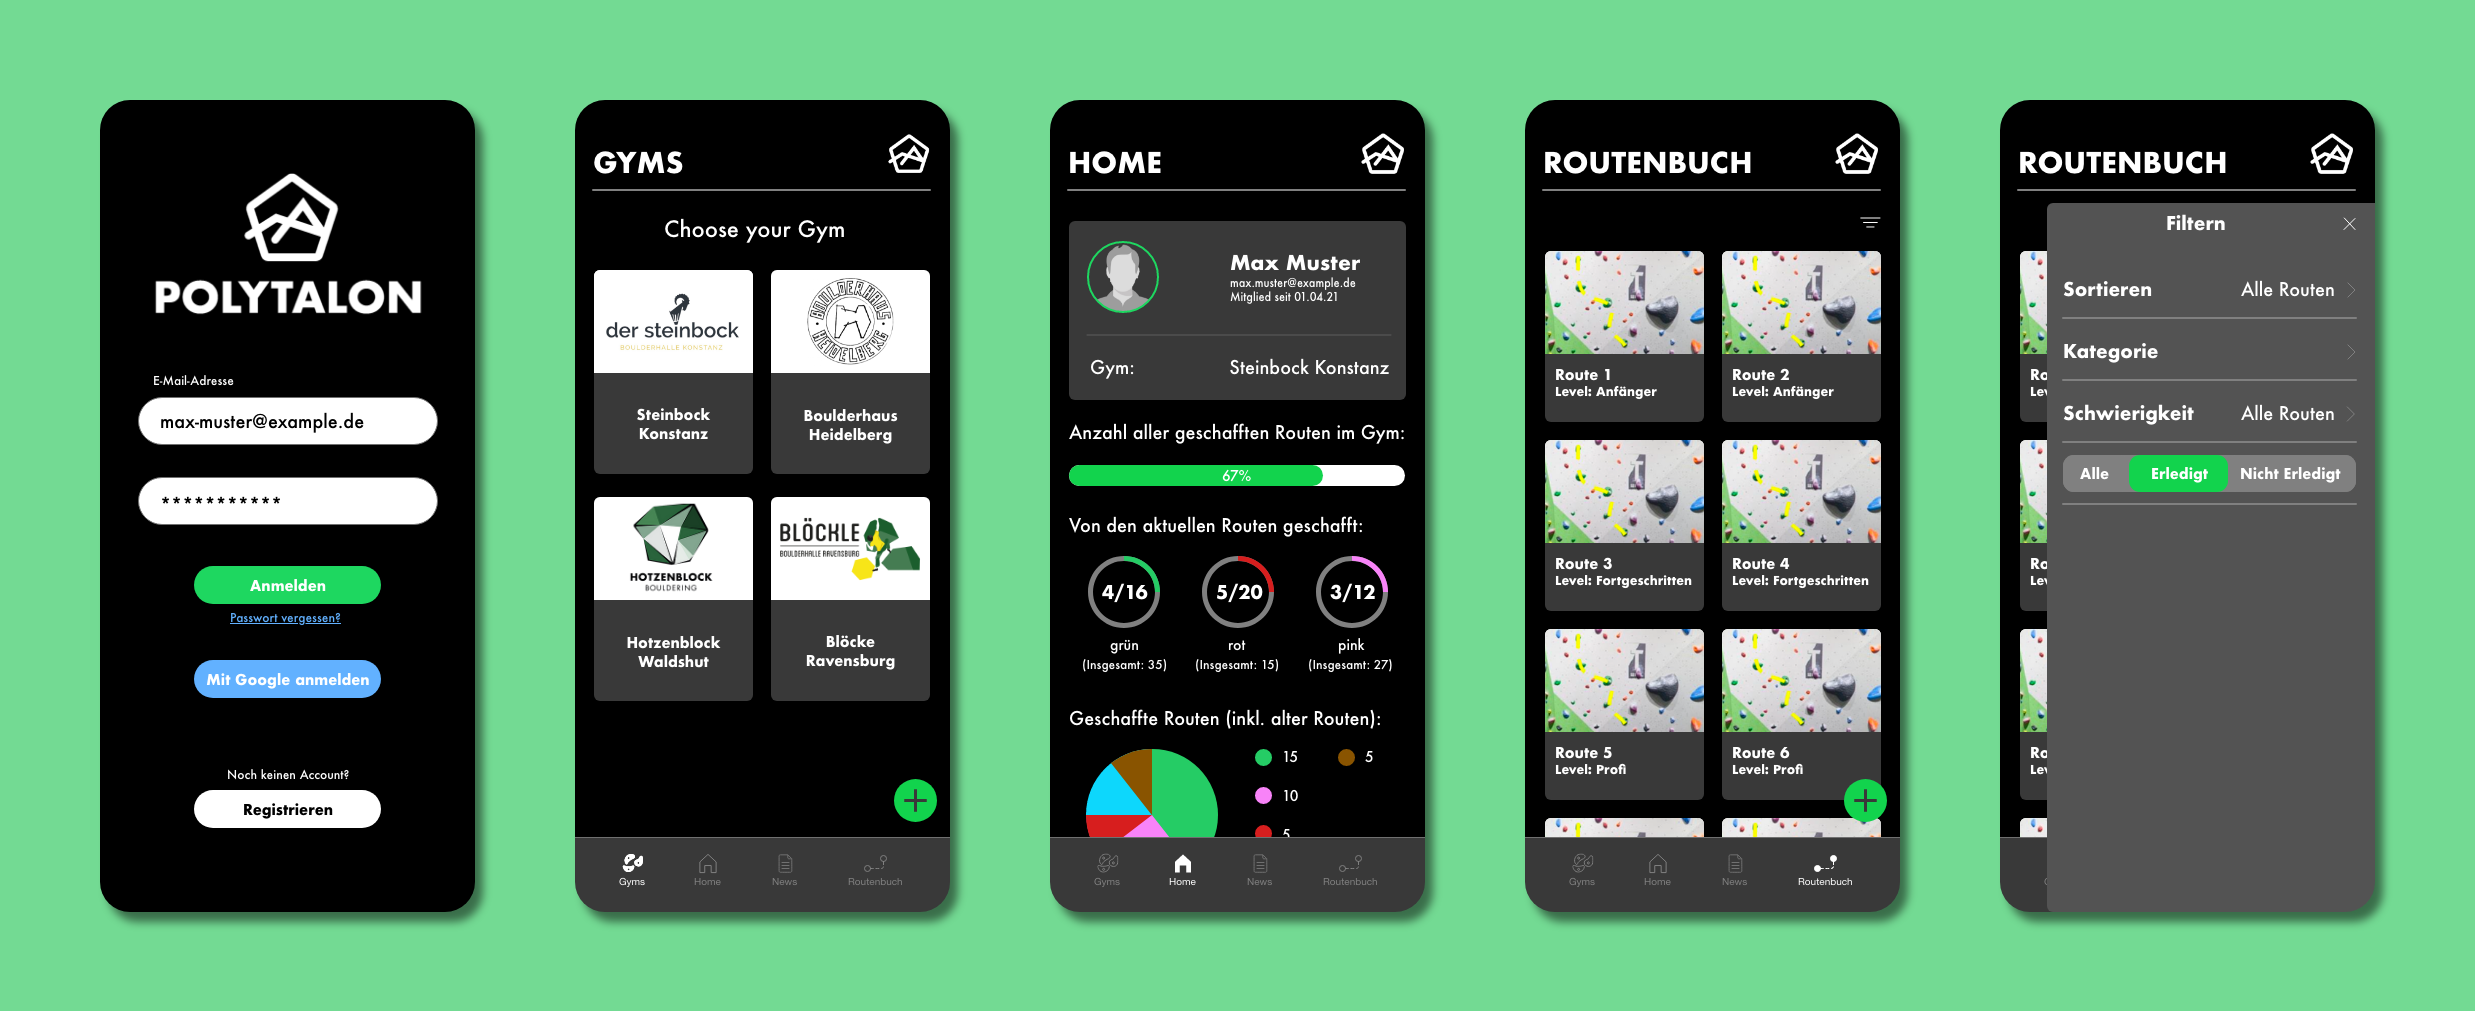 An app designed for climbing gyms and climbers alike